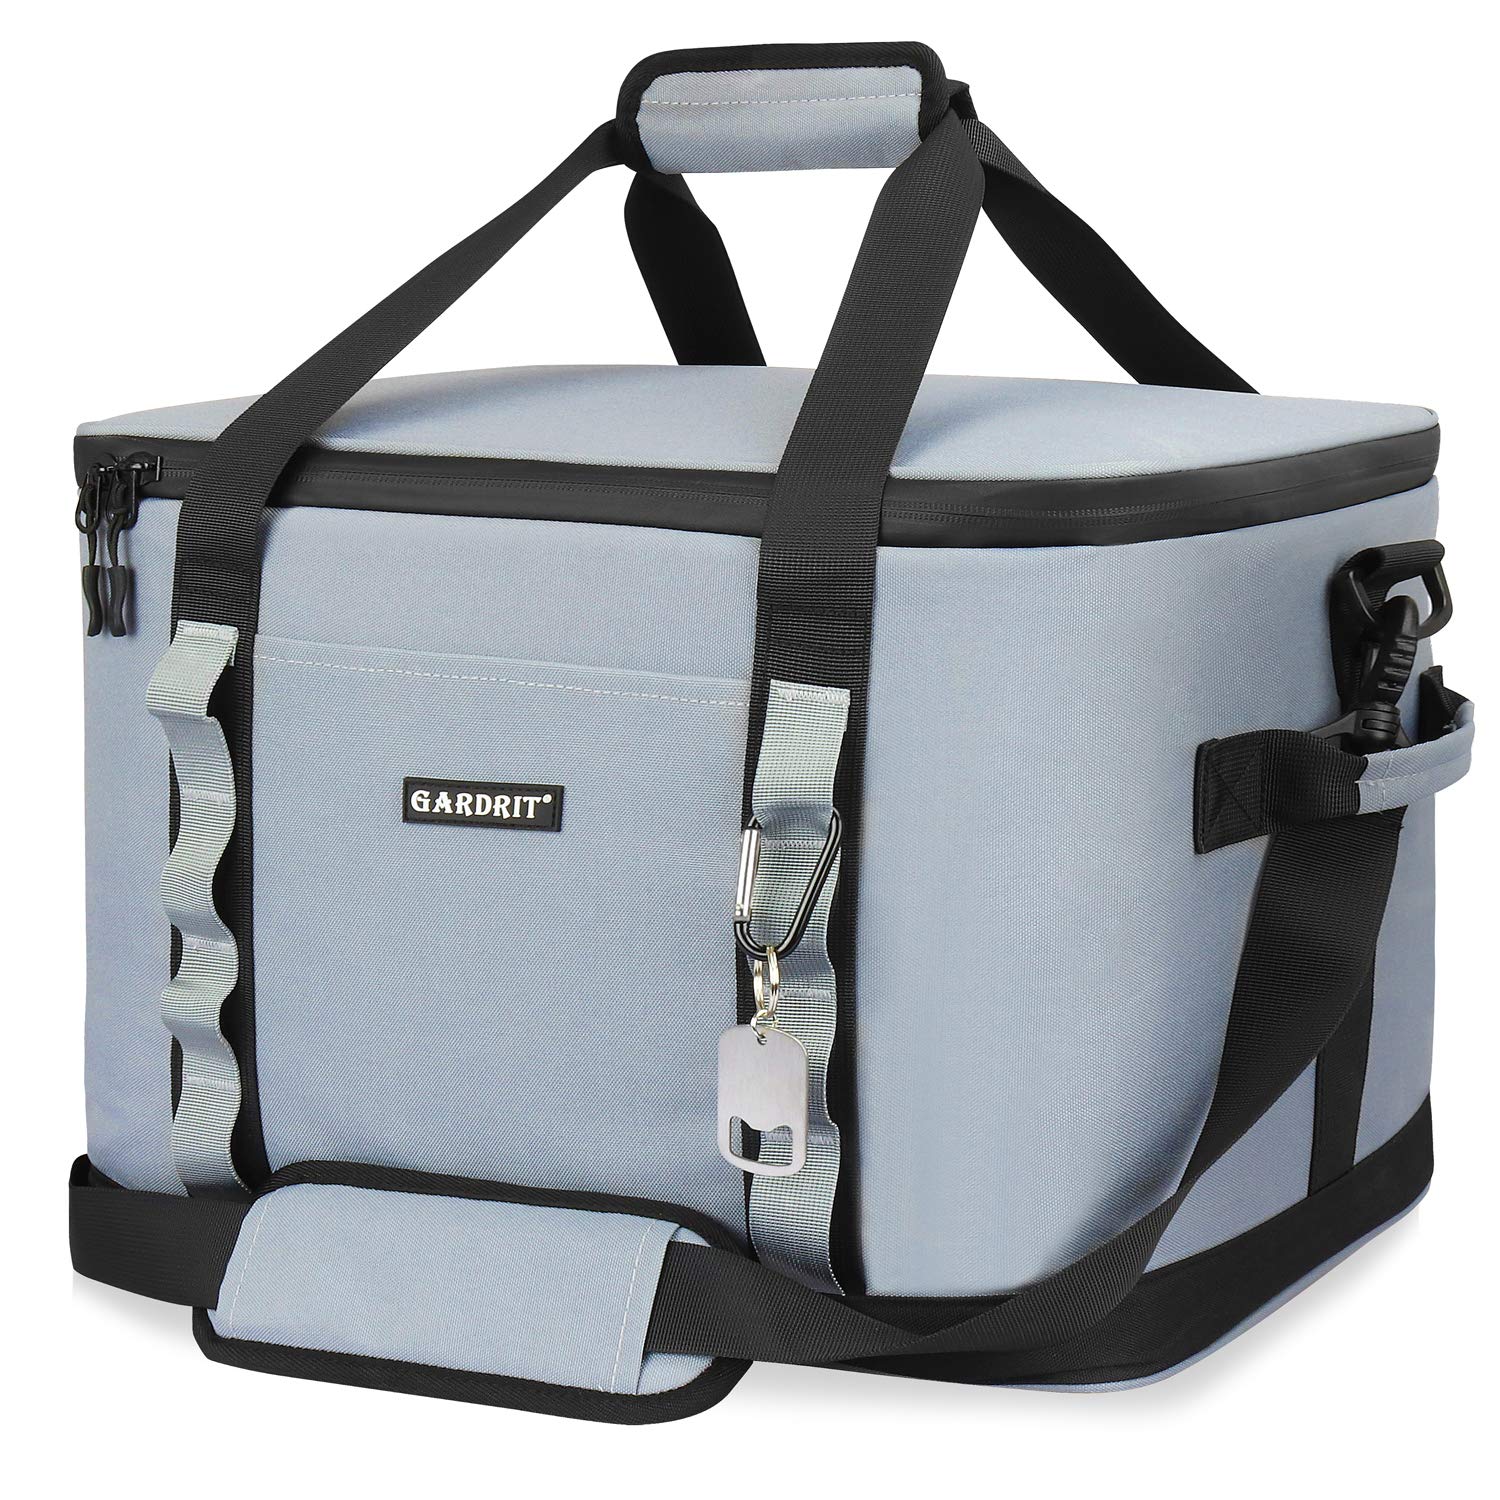 GARDRIT 16/30/60 Can Large Cooler Bag - Collapsible Insulated